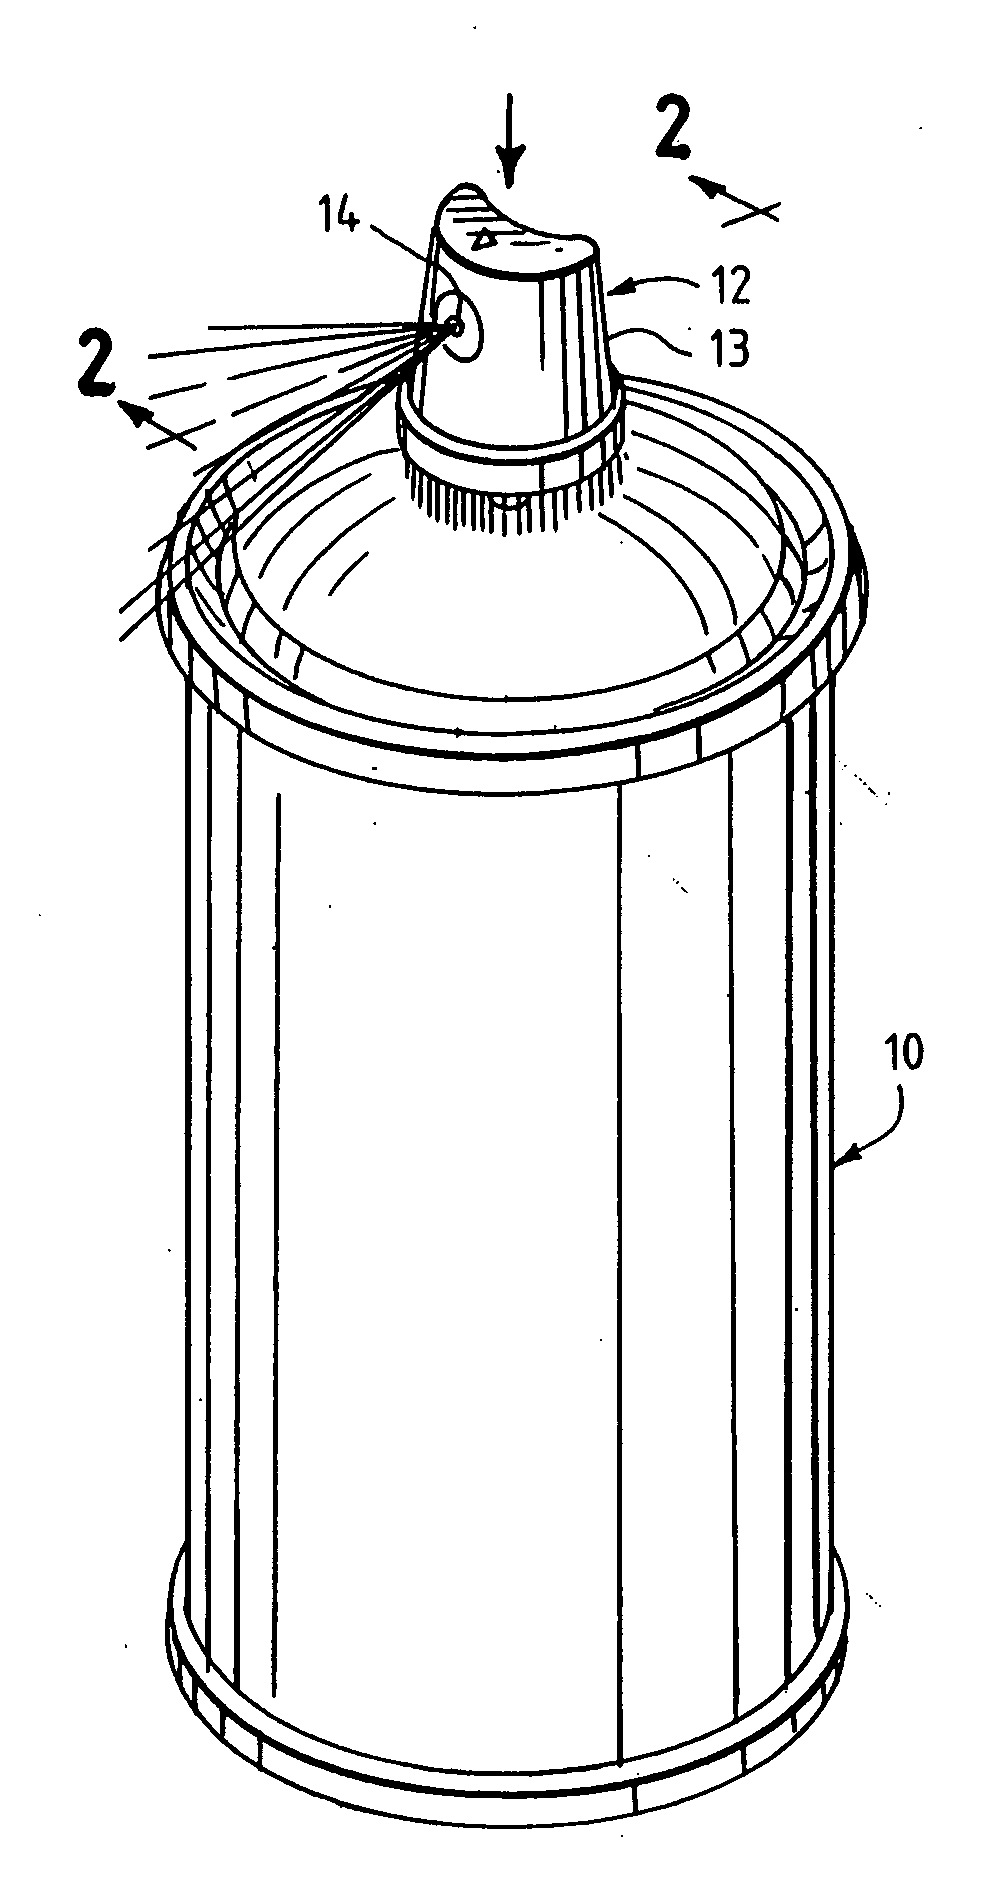 Aerosol compositions, devices and methods